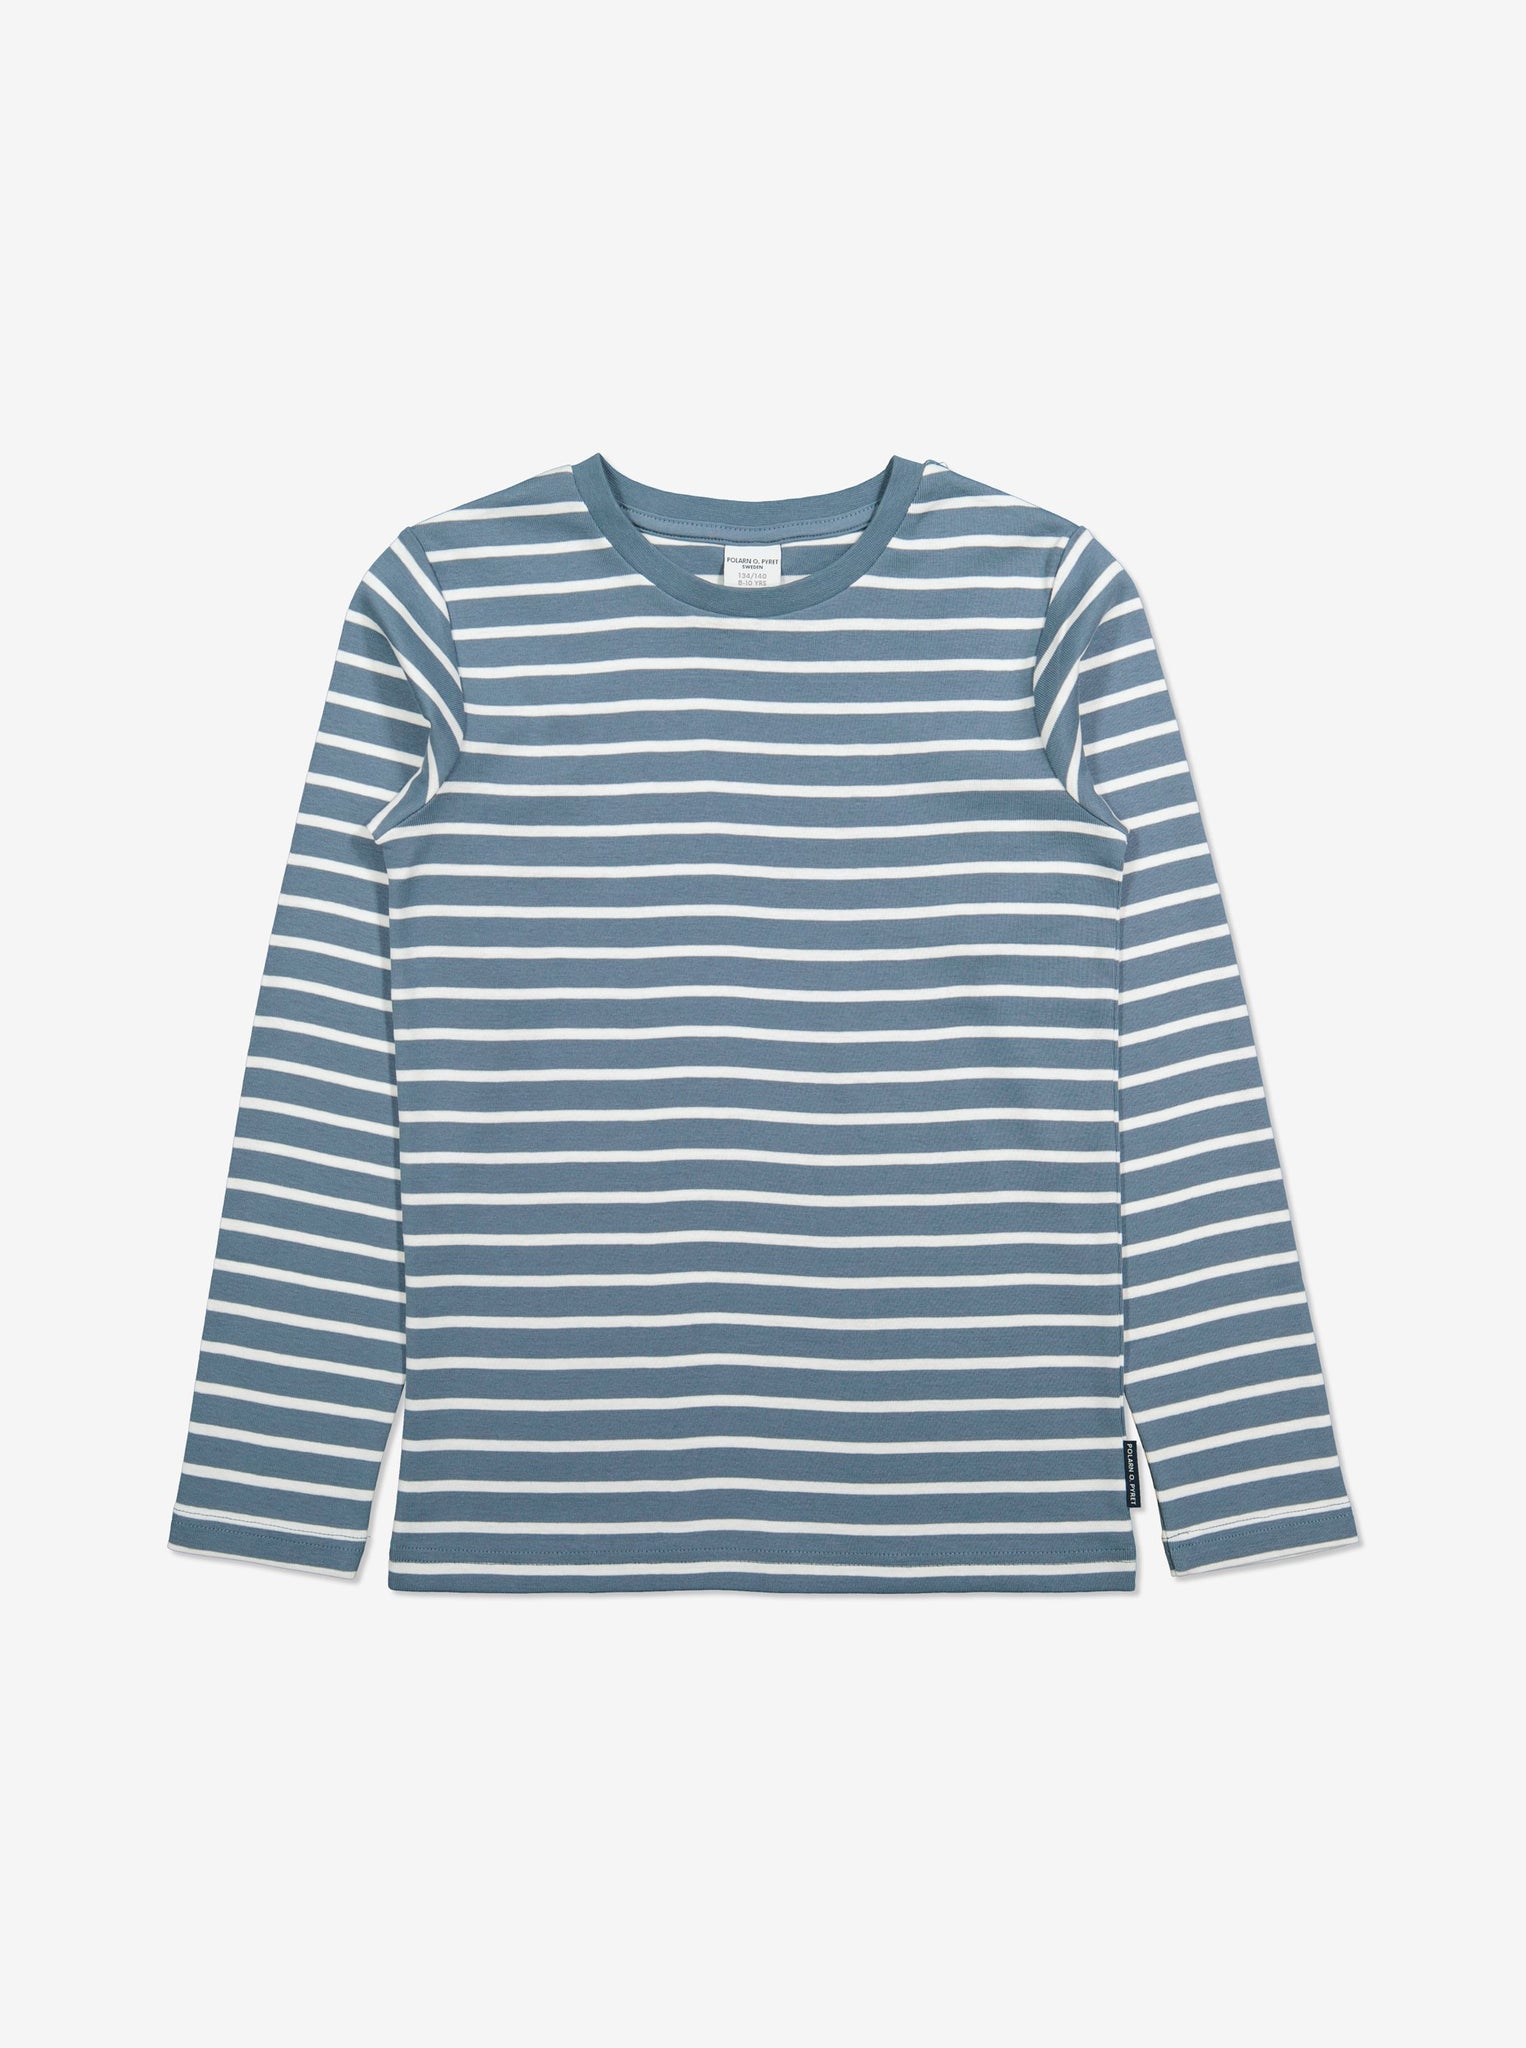  Organic Striped Blue Kids Top from Polarn O. Pyret Kidswear. Made with 100% organic cotton.